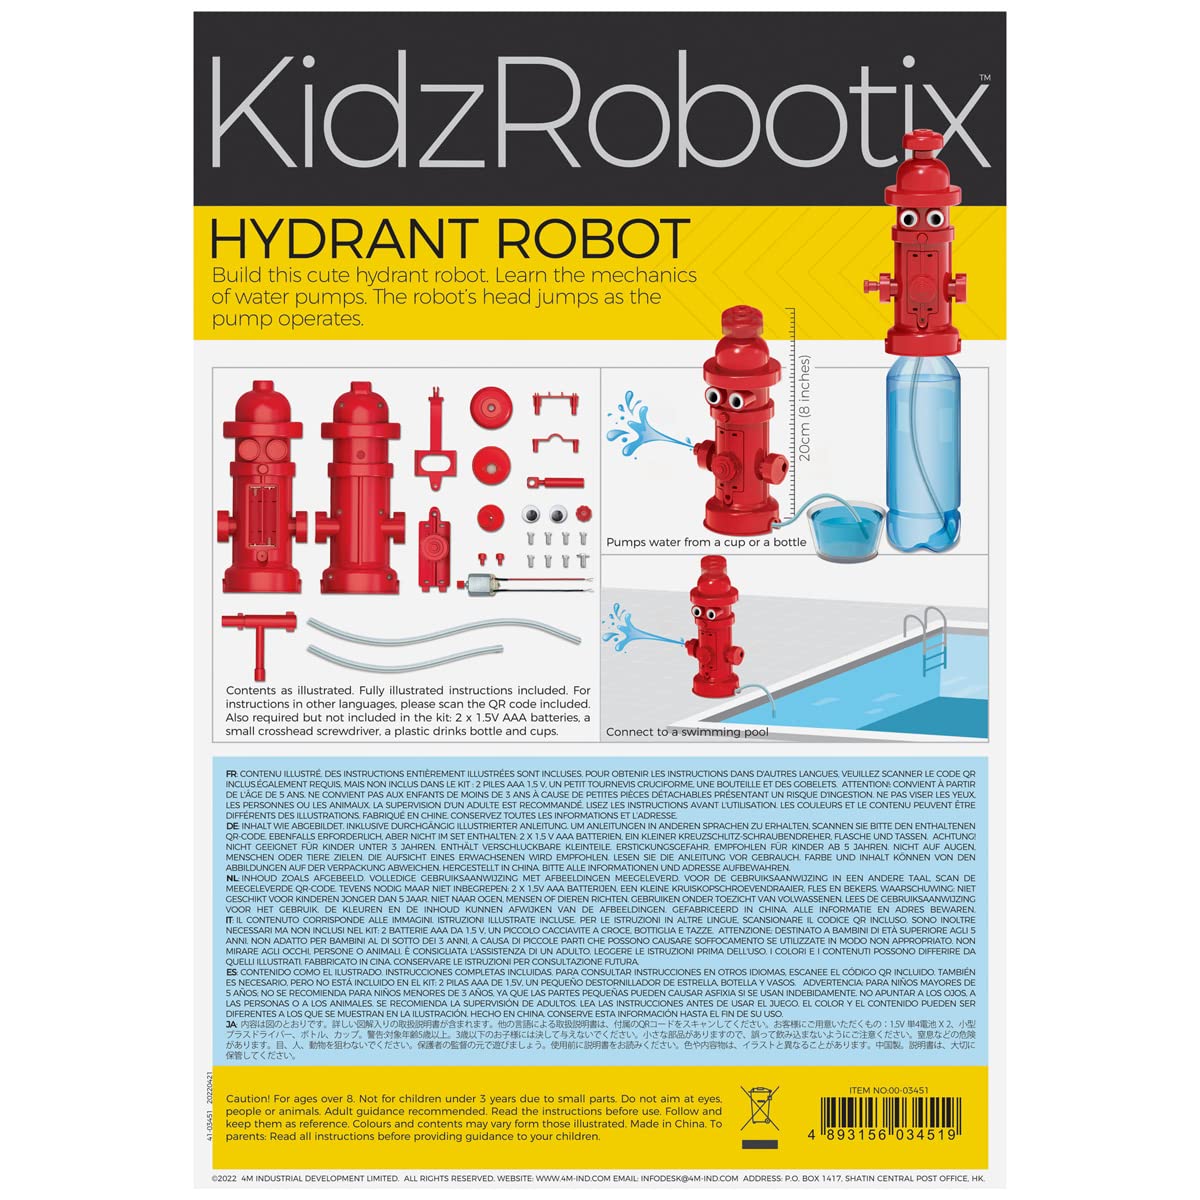 KidzRobotix | Hydrant Robot | Build a Cute Hydrant Robot | Learn The Mechanics of Water Pumps | for Kids Ages 8+